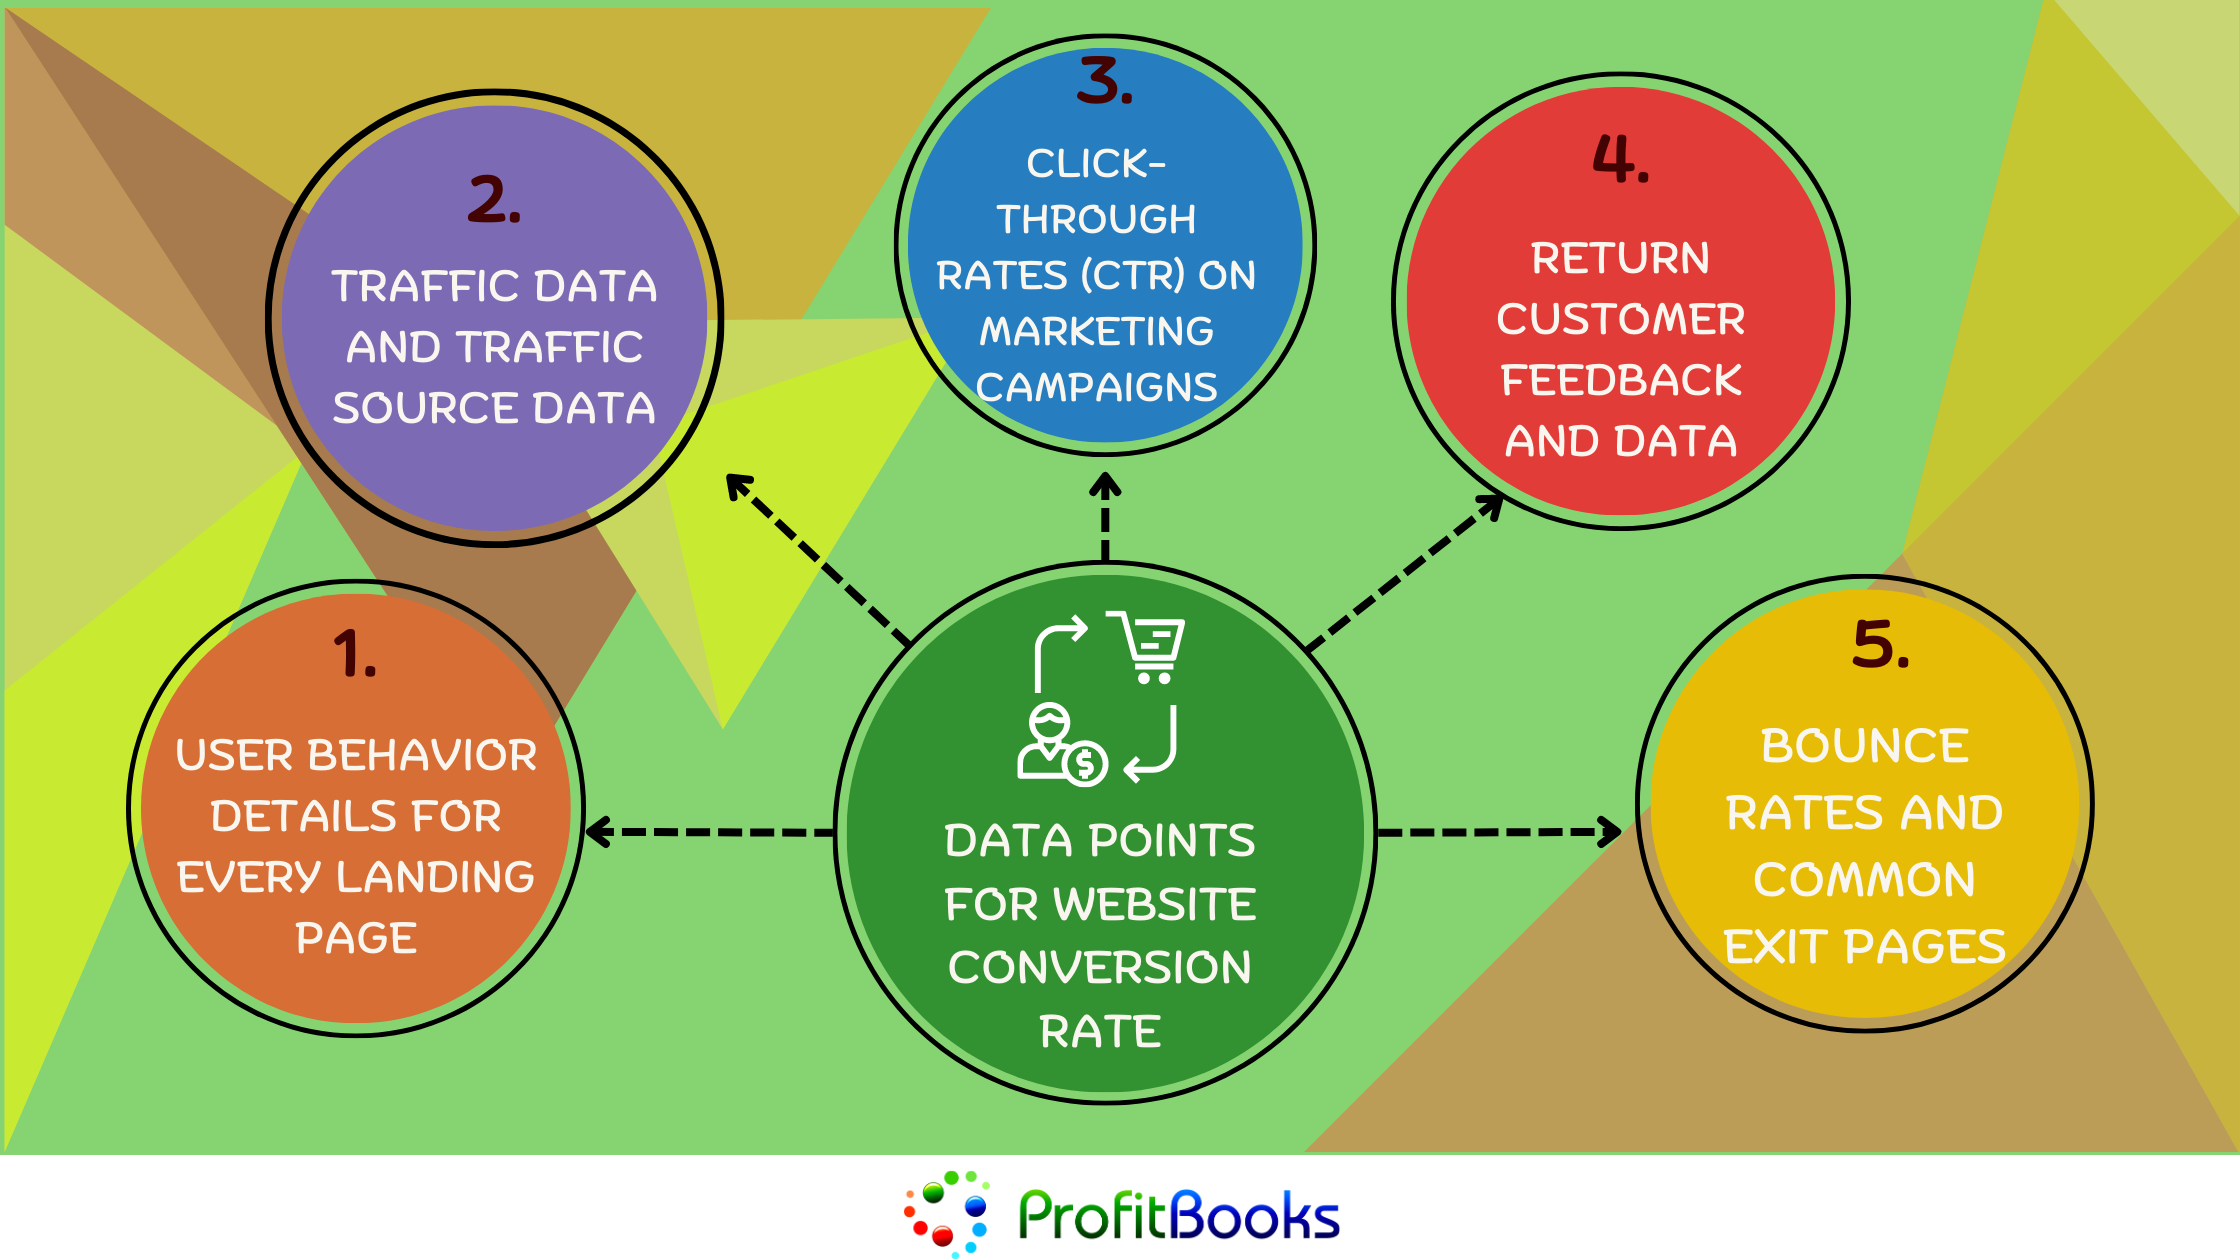 Data Points For Website Conversion Rate